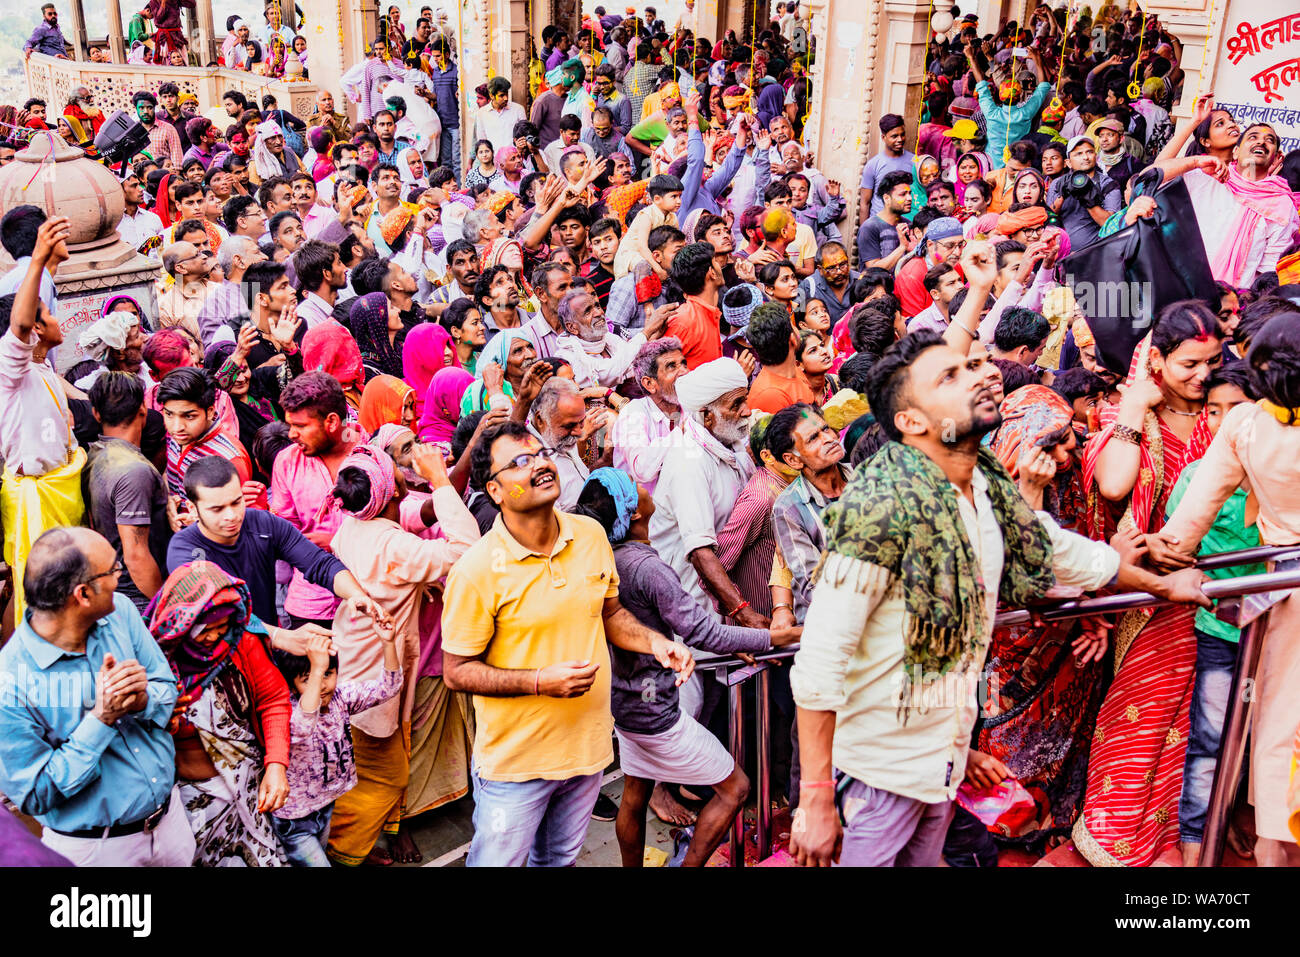 Barsana, India - February 23, 2018 - The crowd waits on the stairs for a temple to open during Holi festival Stock Photo